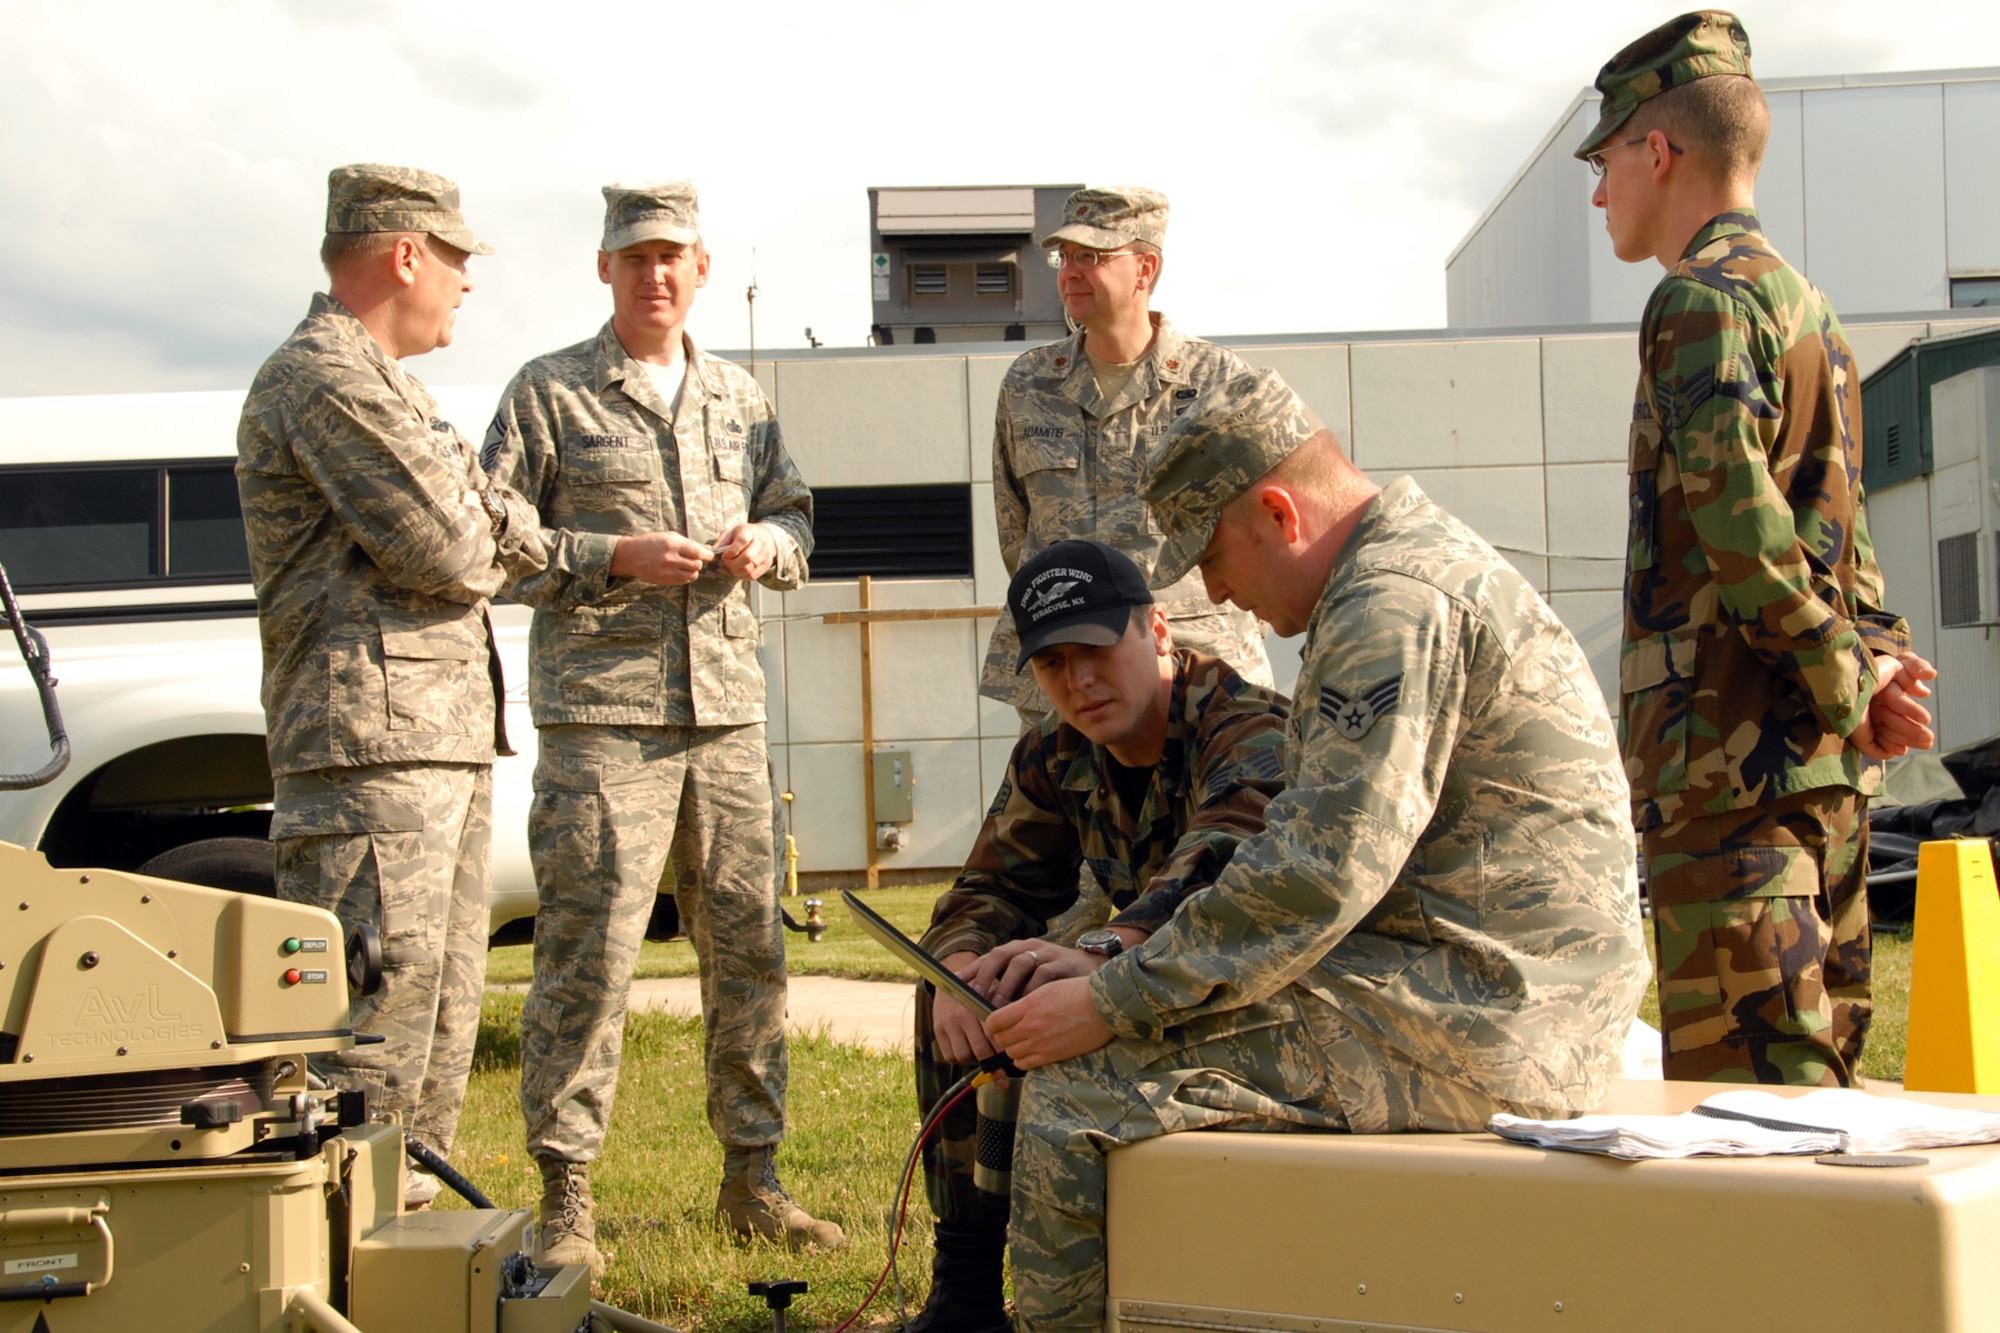 174th Fighter Wing, New York Air National Guard, Commander Col. Kevin W. Bradley meets with members of the 174th Fighter Wing's Communications Flight at Hancock Field in Syracuse, NY, on June 7, 2009. Bradley was being updated on the abilities of the Joint Incident Site Communications Capability system (JISCC). (US Air Force photo courtesy of the 174th Fighter Wing Public Affairs Office/Released)